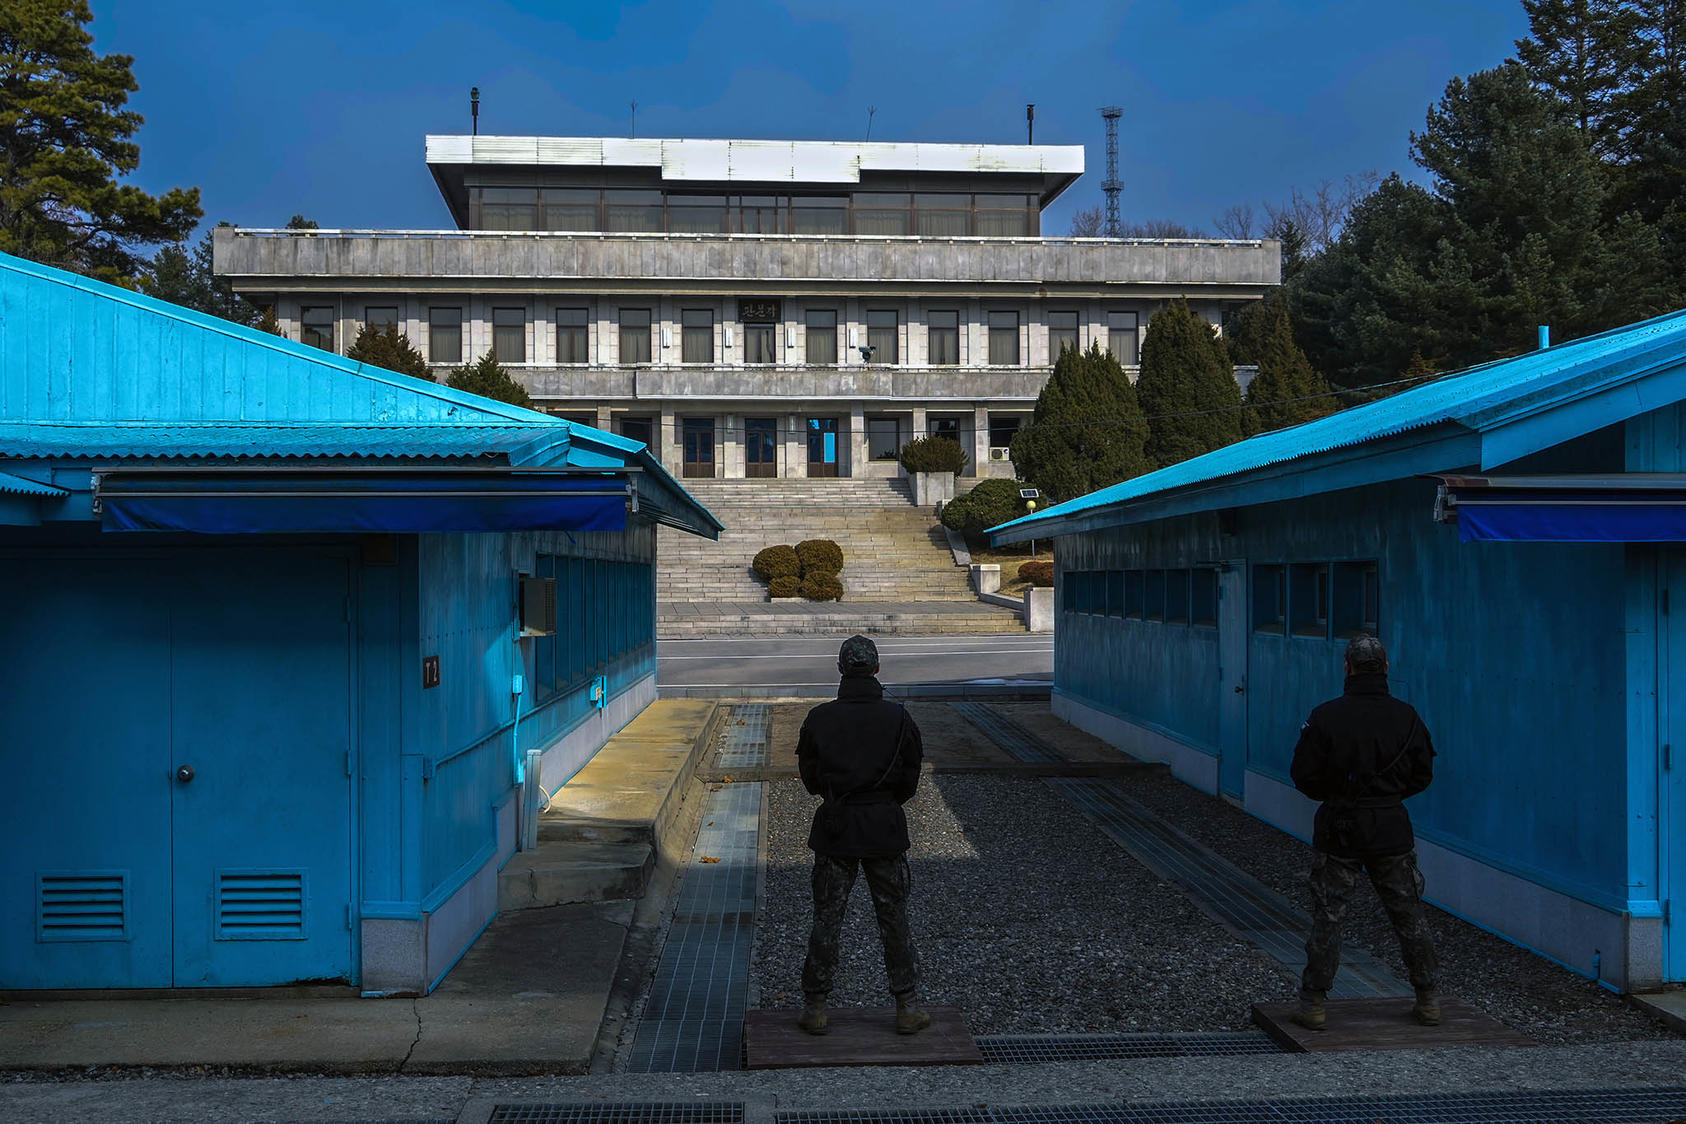 South Korean soldiers stand facing North Korea at the Joint Security Area at Panmunjom, in the Demilitarized Zone between North and South Korea, on Feb. 7, 2023. (Chang W. Lee/The New York Times)